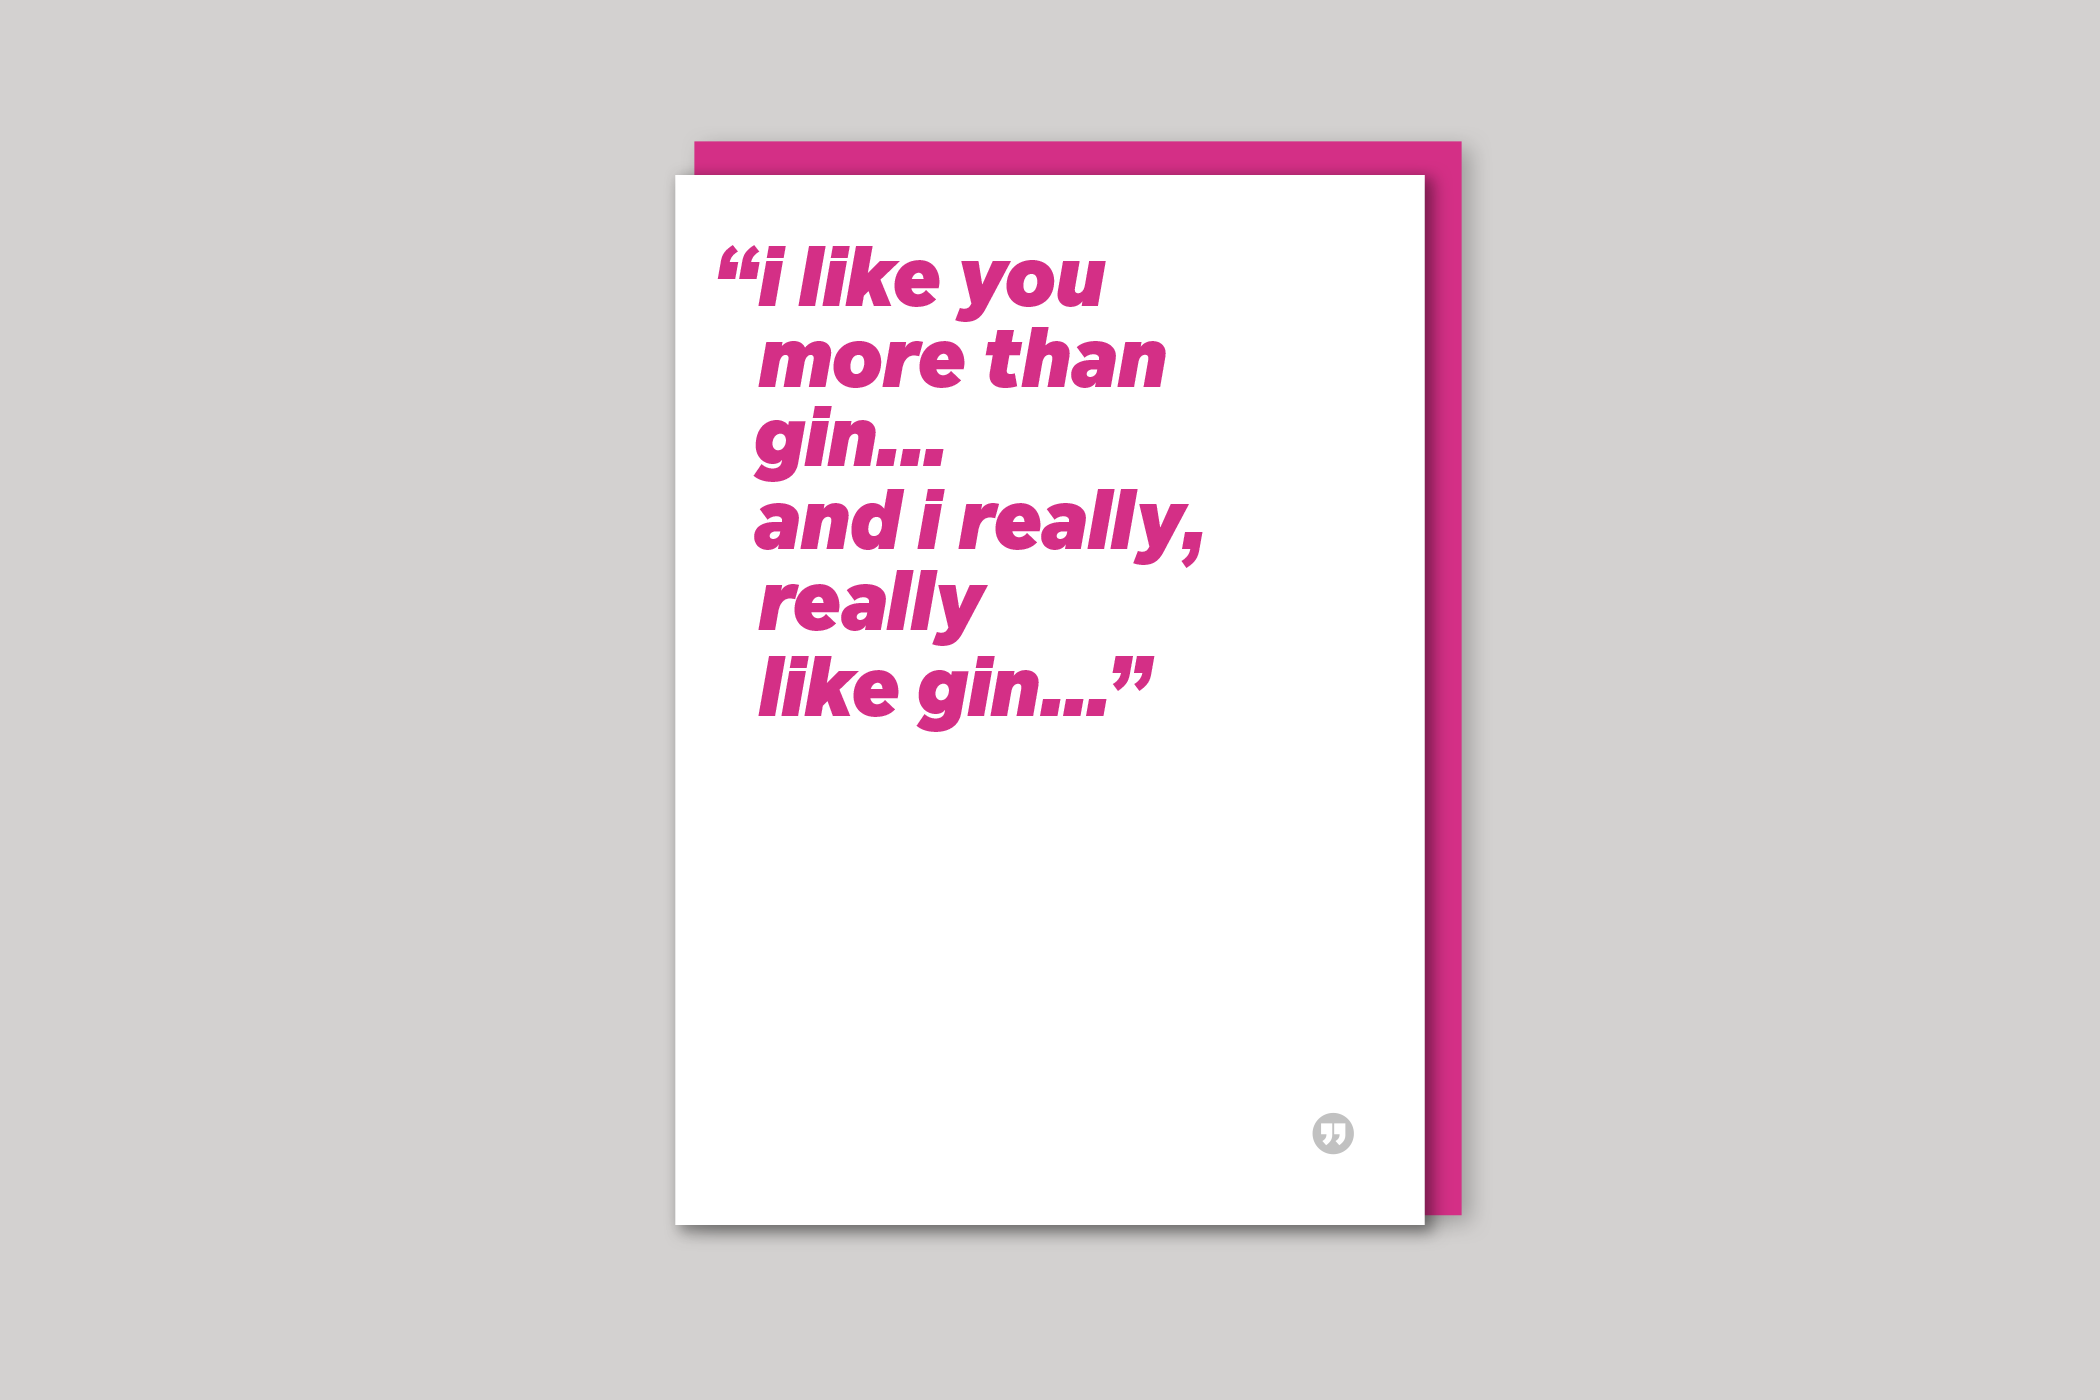 I Like You funny quotation from Quotecards range of cards by Icon, back page.